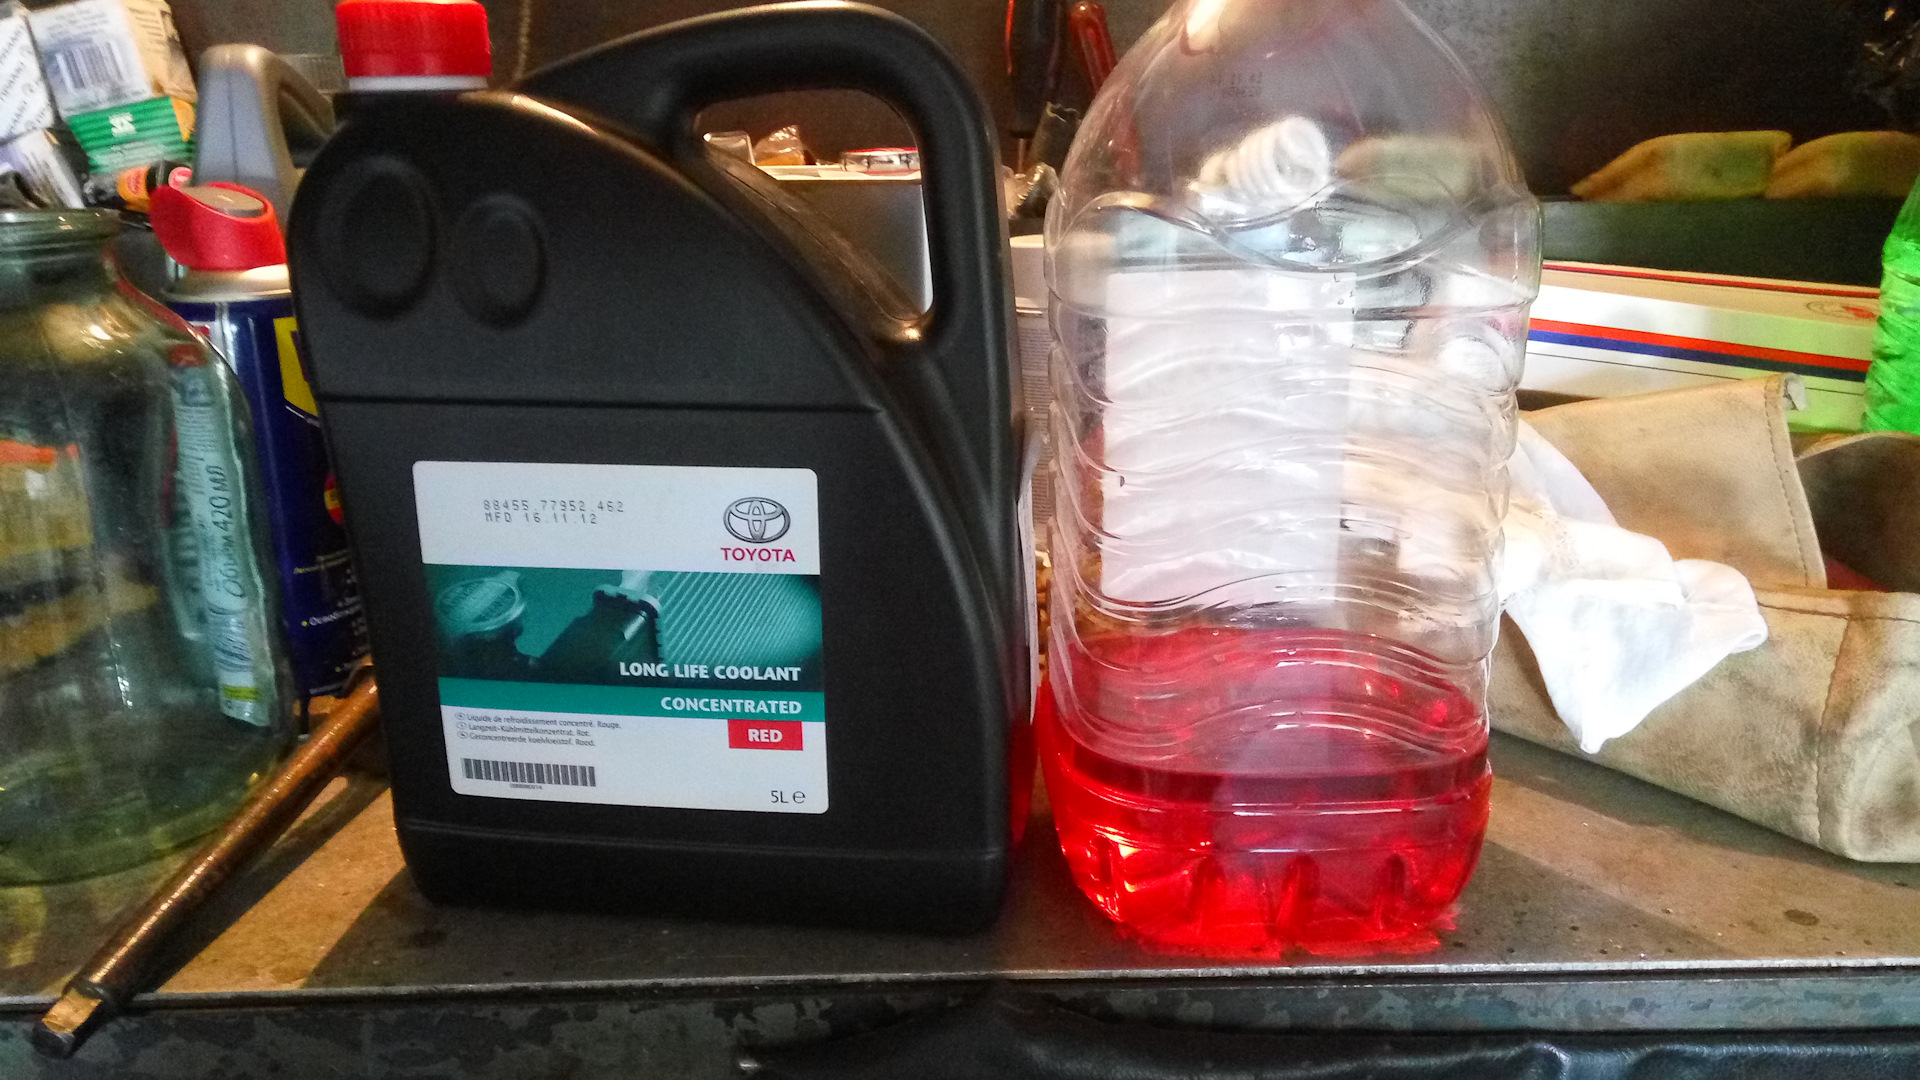 Long life coolant red. Toyota super long Life Coolant 2022. Toyota super long Life Coolant цвет. Toyota long Life Coolant Red. Toyota long Life Coolant concentrated Red.